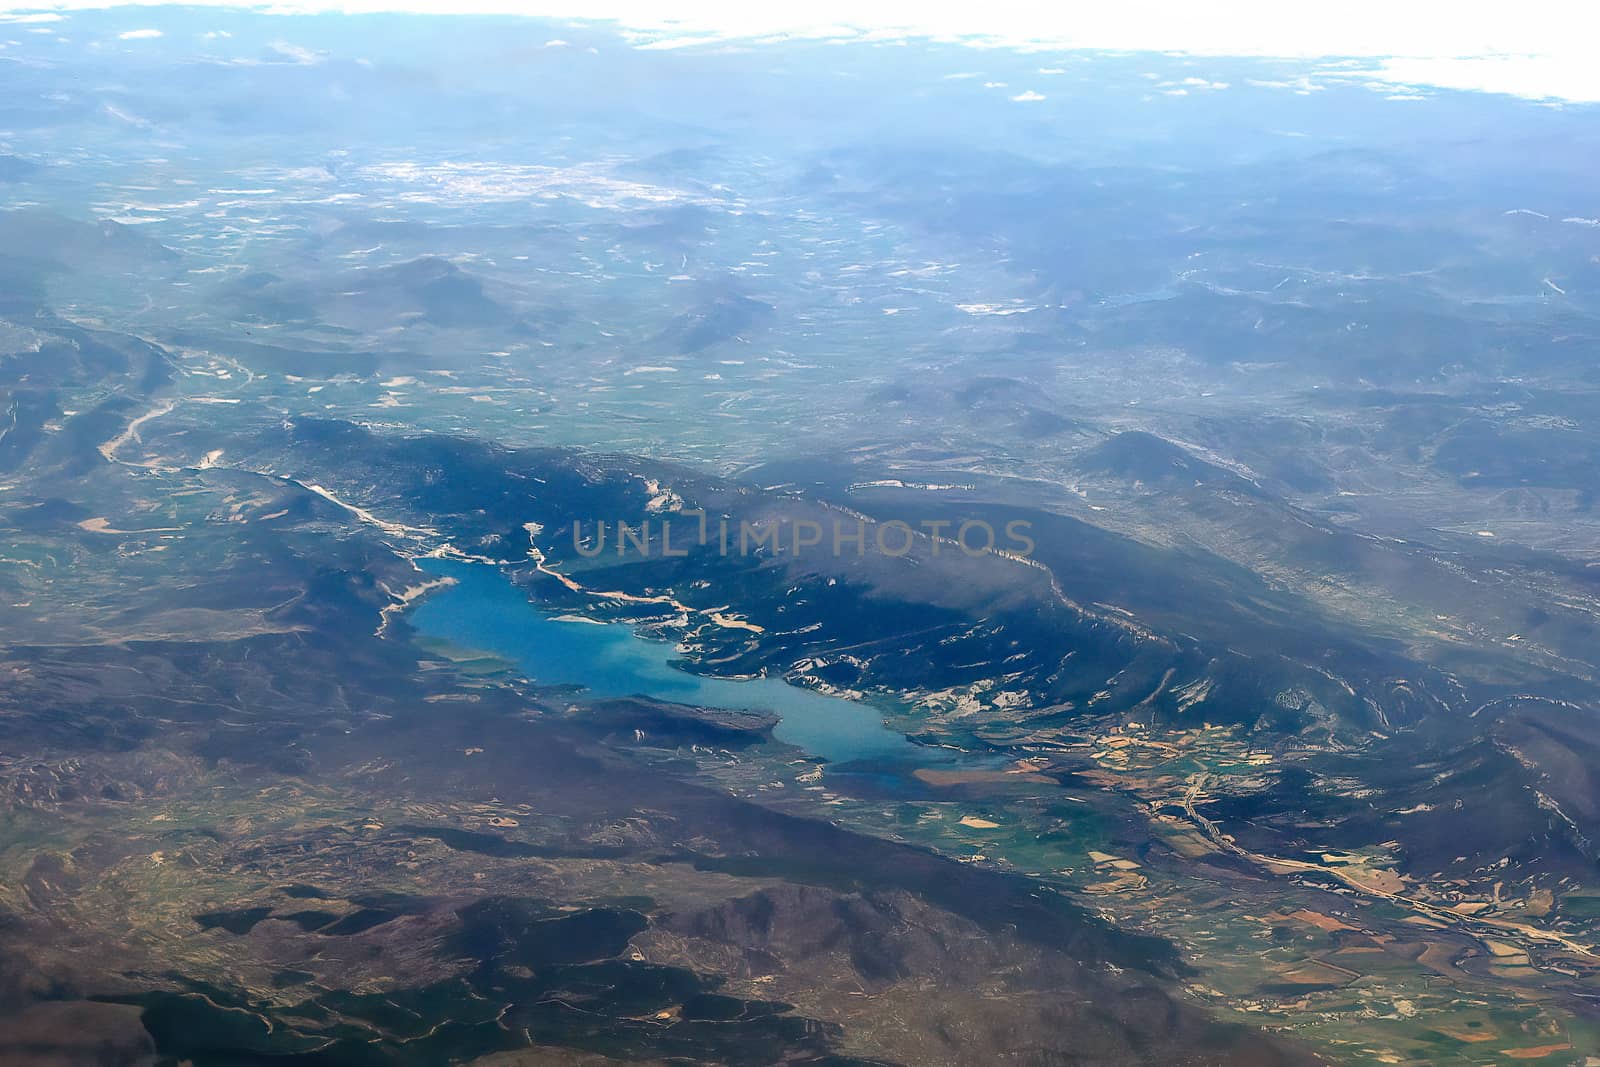 Top view of the ground from the plane. European landscape. Colorful pattern of trees, fields, rivers and lakes. Soft focus.